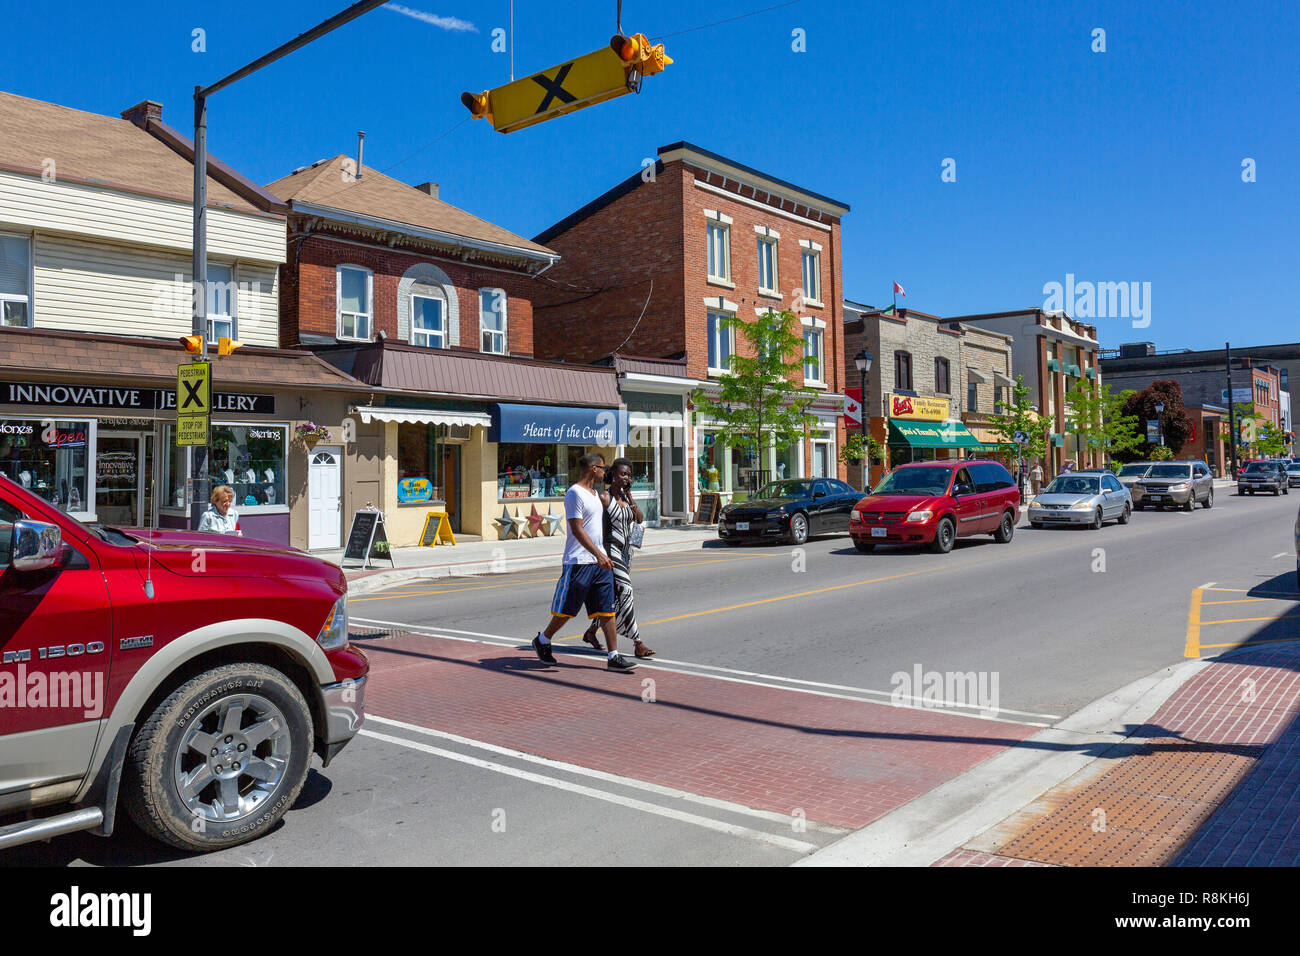 Canada, Province of Ontario, Prince Edward County, Picton City, Main Street and its various shops, pedestrian crossing Stock Photo